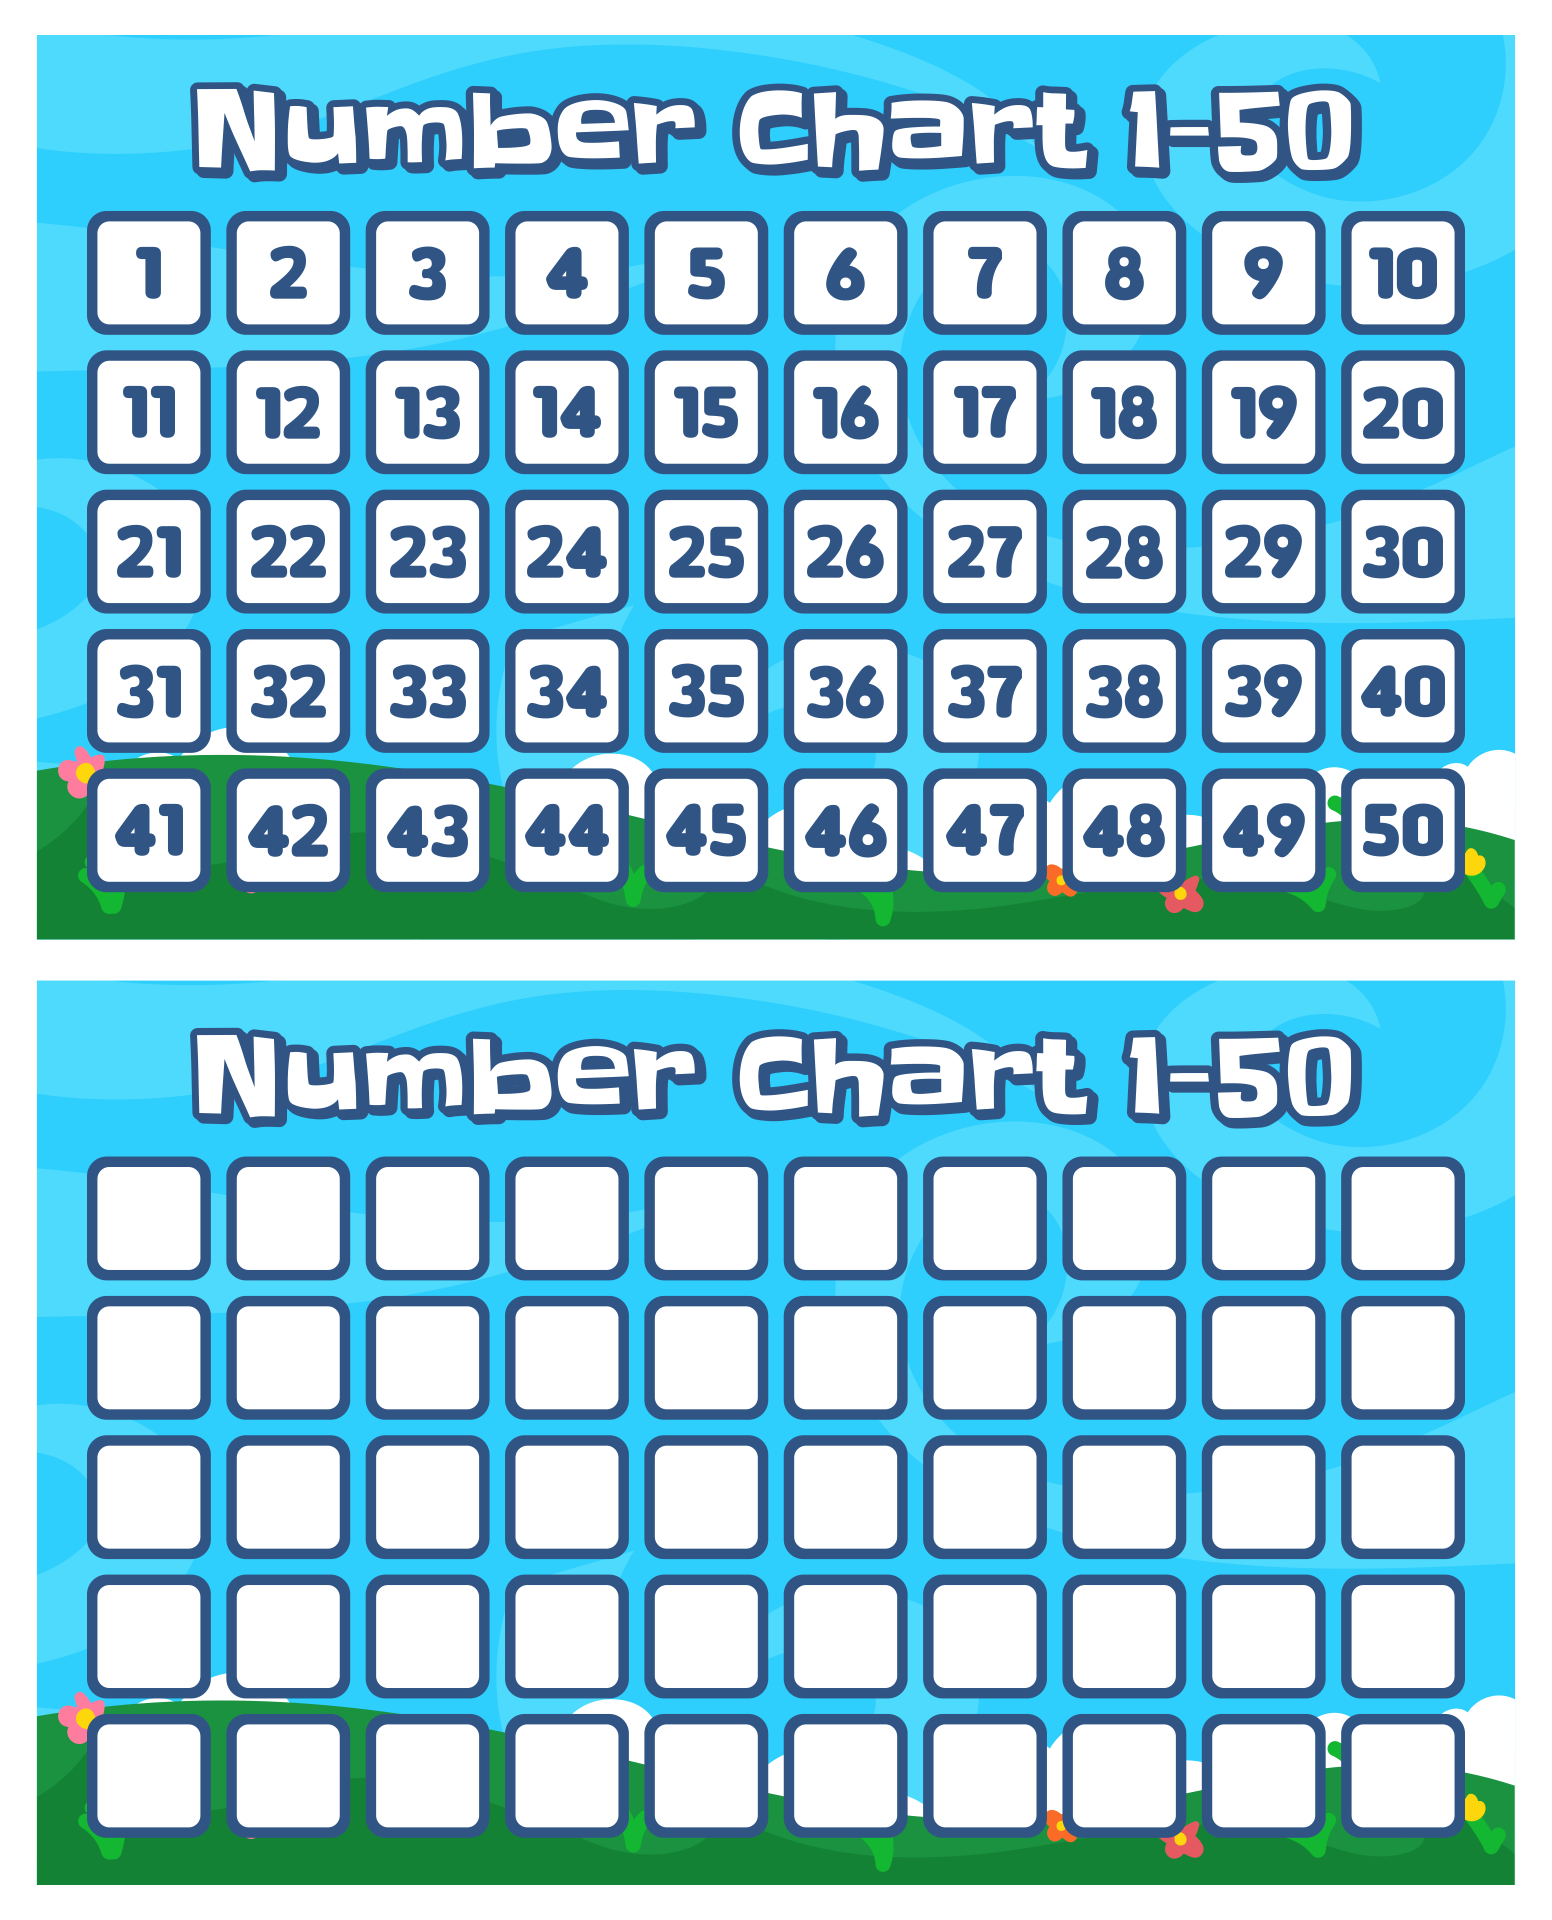 4 Best Images of Large Printable Number Chart 1-50 - Printable Number